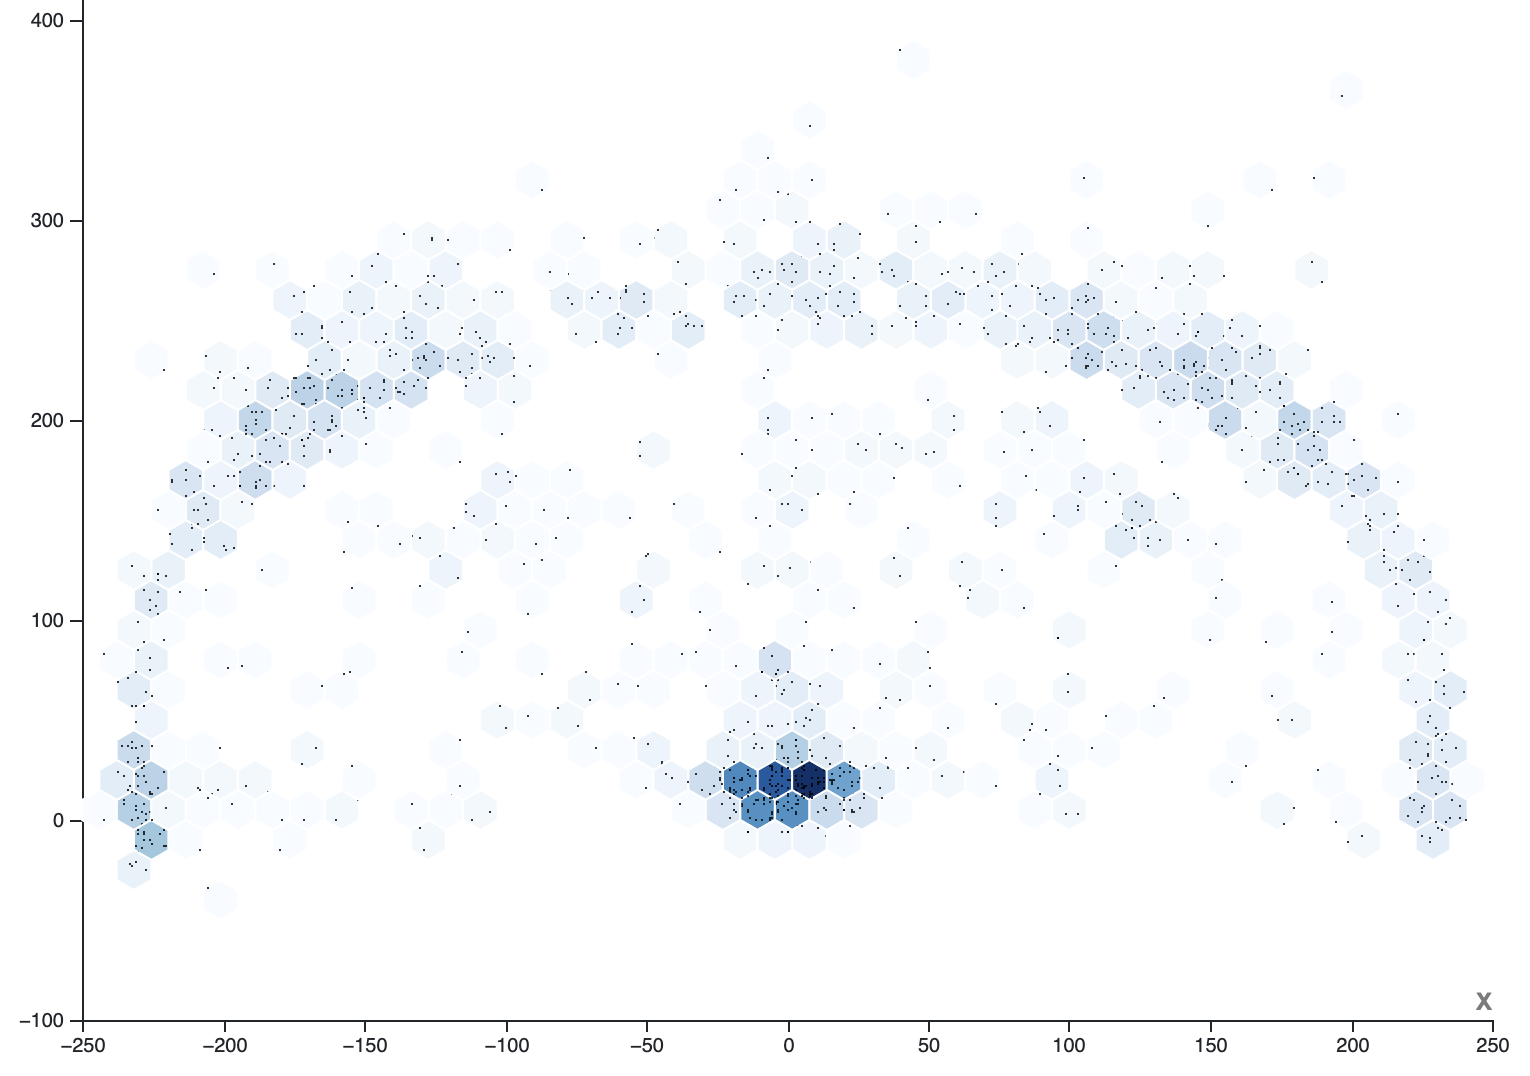 A hexagonal binned scatter plot of the same data as in the plots above. The patterns in the data are much more visible than in the regular scatter plots. The data points are overlaid as small black points